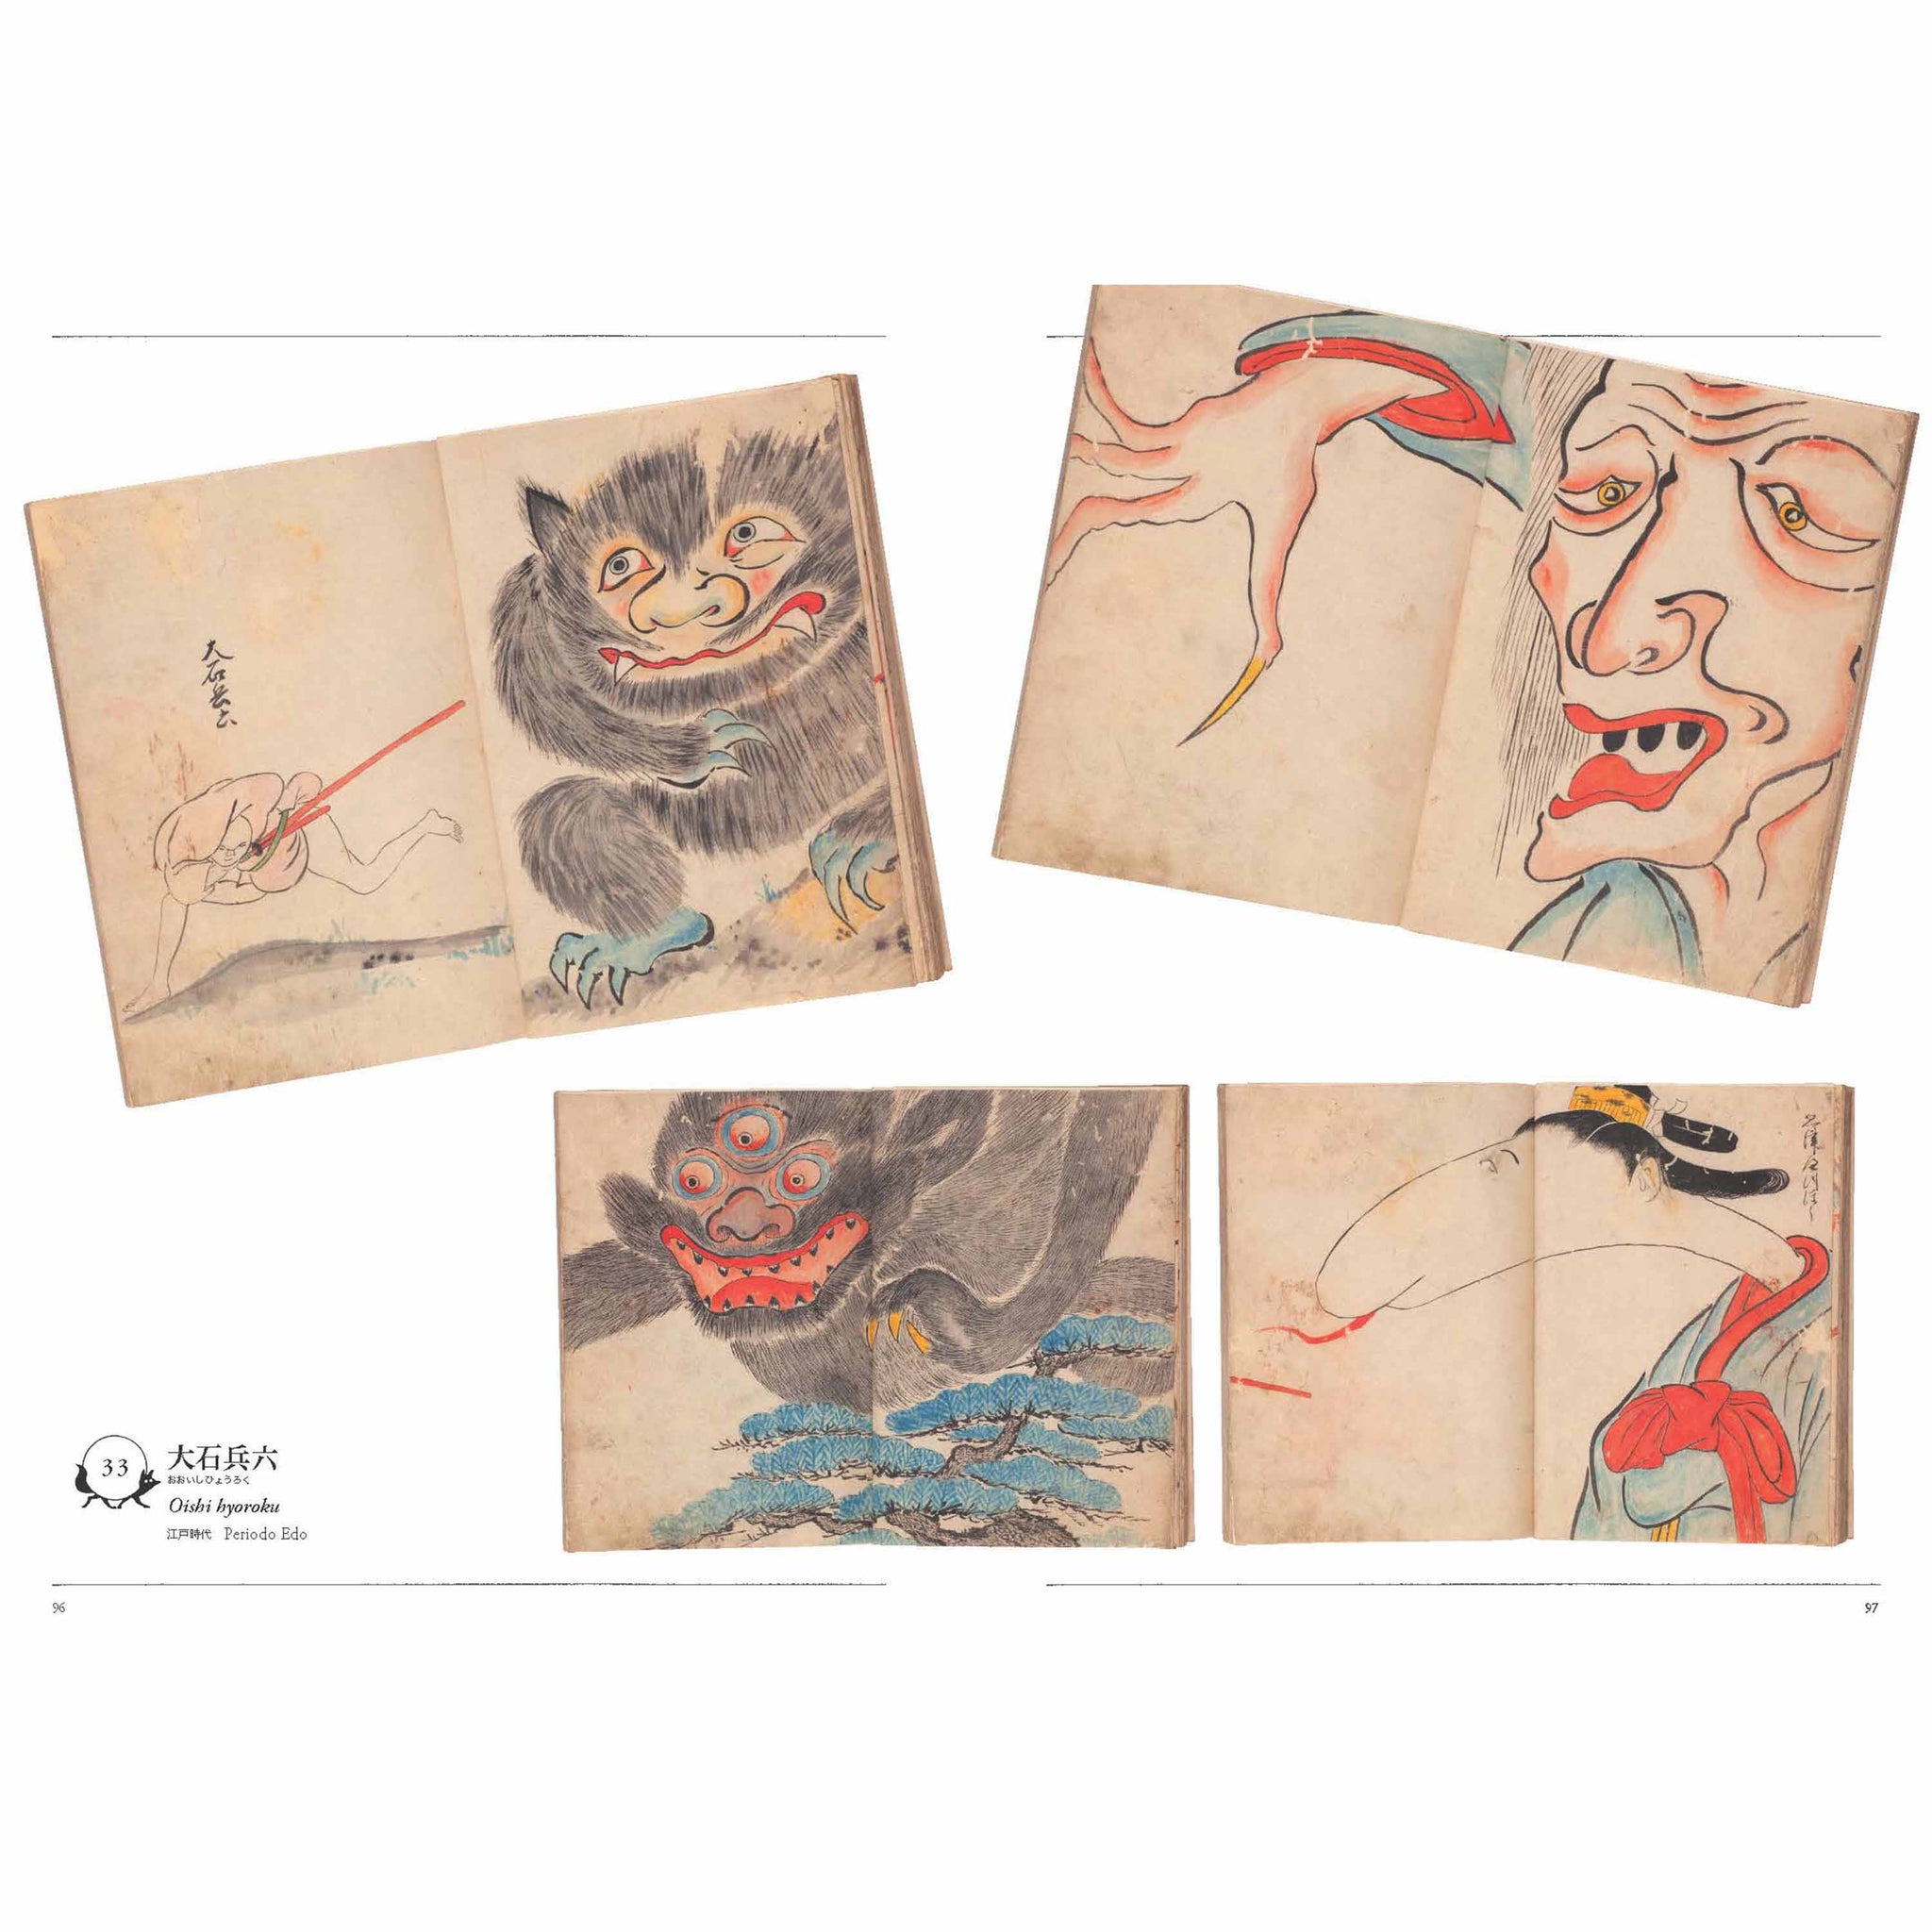 The Yōkai Museum - Japanese ghosts and monsters from the Yumoto Kōichi Collection